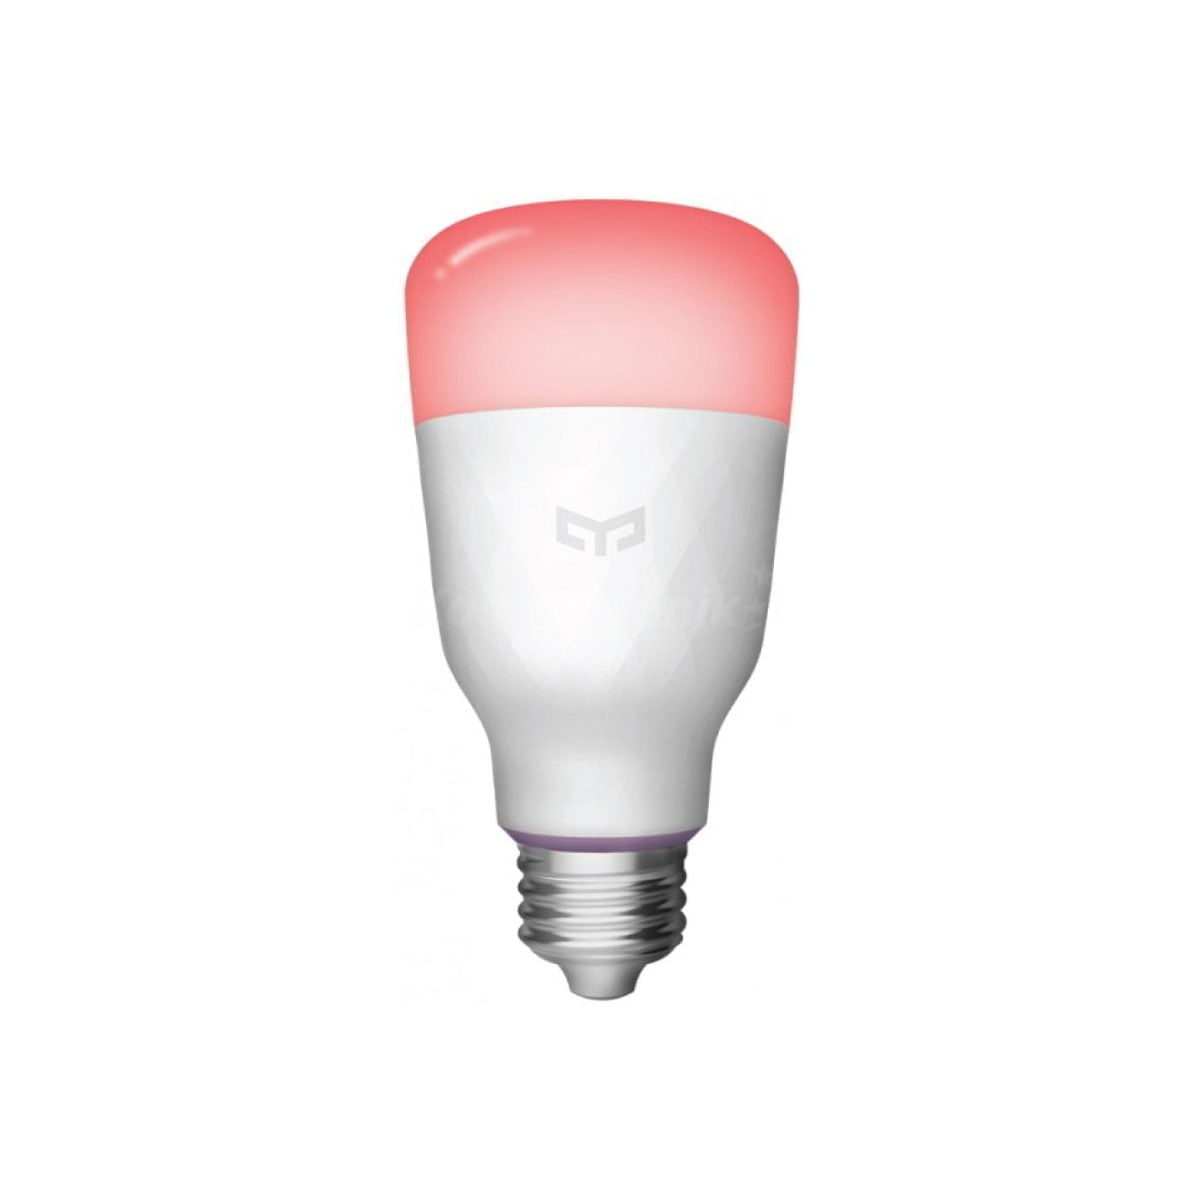 Yldp13Yl 4 1 Xiaomi The Yeelight 1S Rgb Smart Light Bulb Will Allow You To Create Your Own Smart Home. You Can Control It With Your Voice Or Application And Decide With What Temperature And Power It Should Shine. Luminous Flux: 800Lm Color Temperature: 1700K-6500K Lamp Holder: E27 Rated Power: 8.5W &Nbsp; 16 Million Colors Wifi Enabled, Voice Control, App Control, Music Sync &Lt;Img Class=&Quot;Alignnone Wp-Image-8061 Size-Full&Quot; Src=&Quot;Https://Lablaab.com/Wp-Content/Uploads/2020/04/Bulb-27-2-Scaled.jpg&Quot; Alt=&Quot;&Quot; Width=&Quot;2560&Quot; Height=&Quot;357&Quot; /&Gt; &Nbsp; Yeelight Smart Bulb Yeelight Smart Bulb 1S (Color)